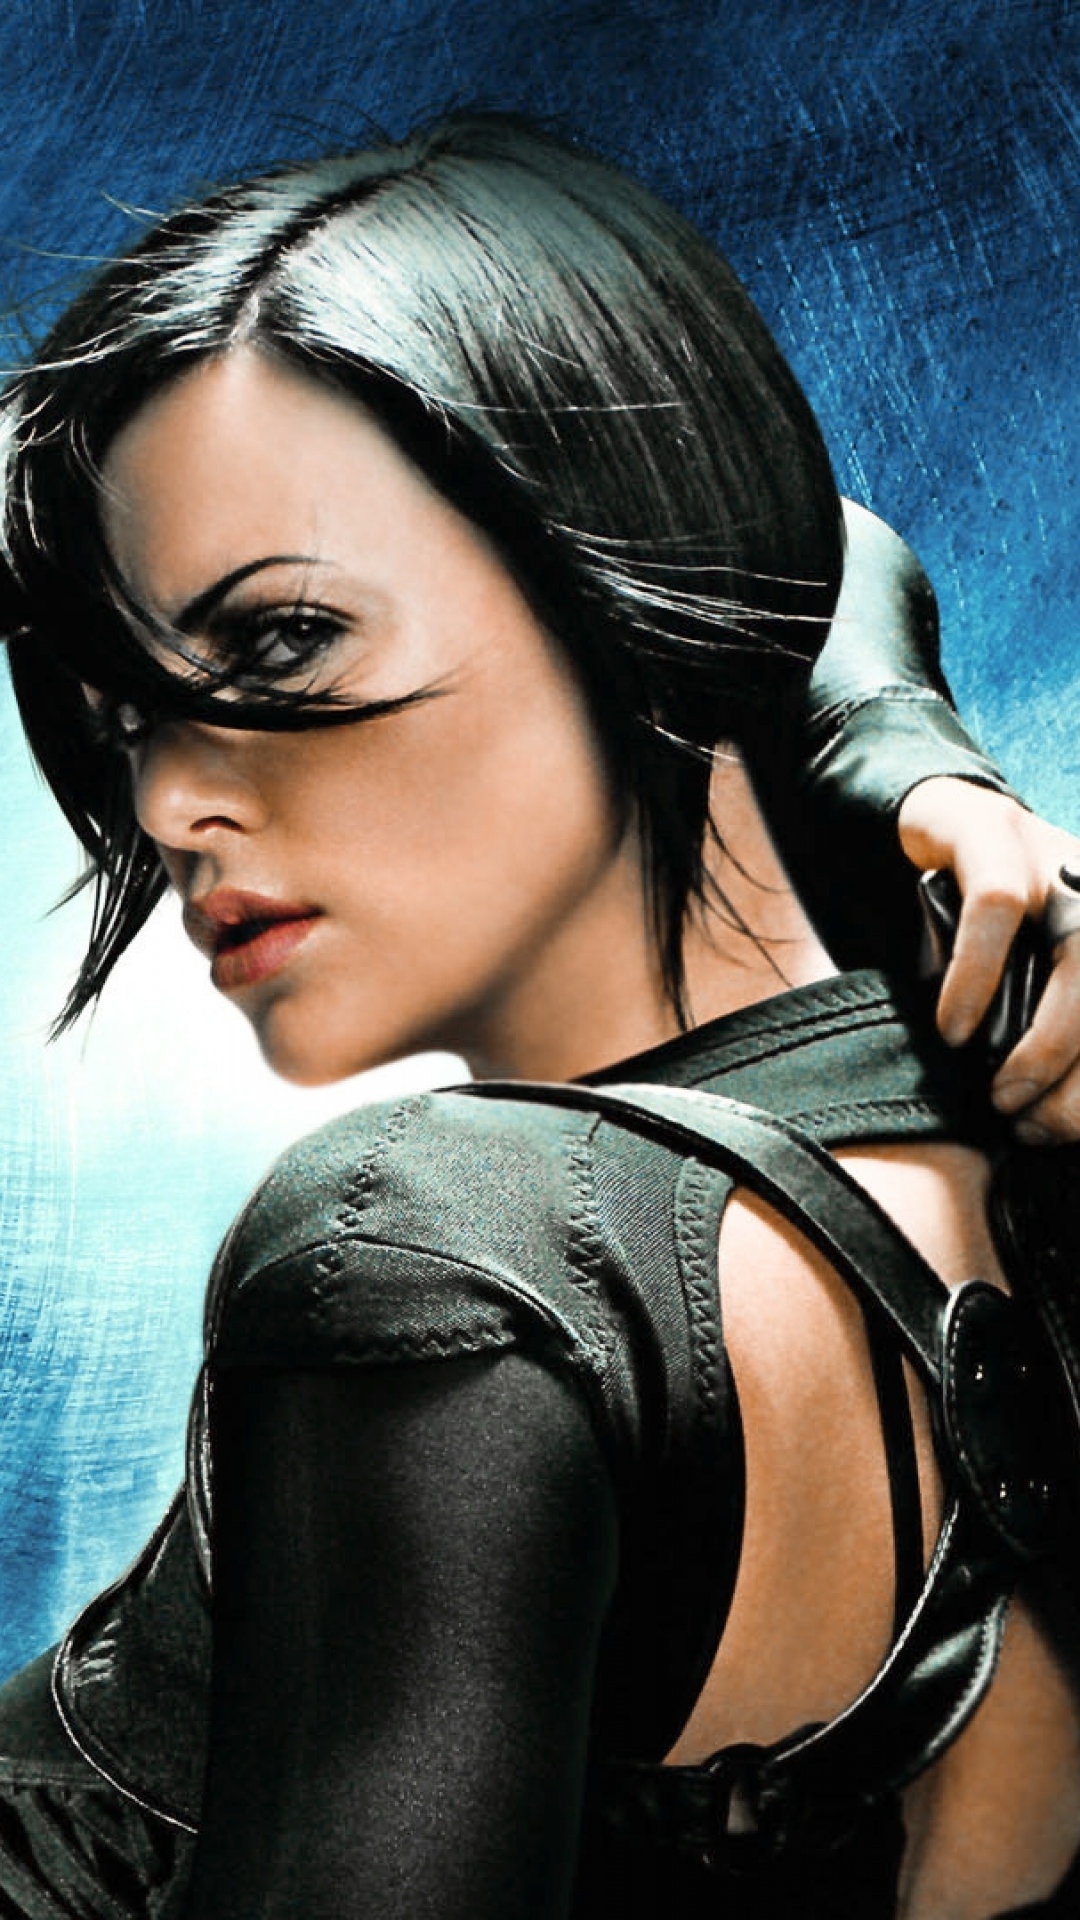 Actress Wallpapers aeon flux on flux charlize theron girl actress 4051